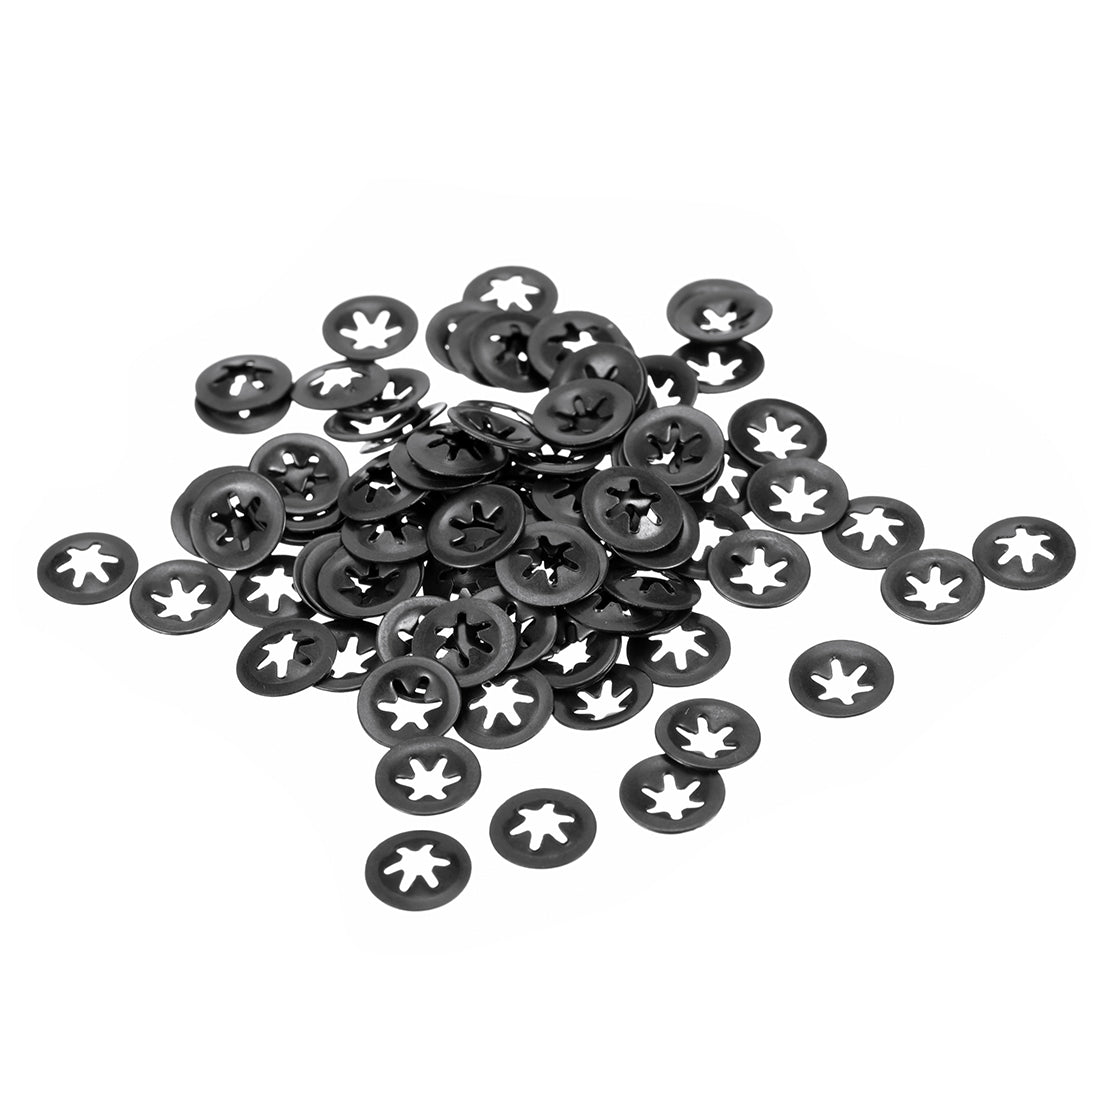 Uxcell Uxcell M3 Internal Tooth Star Locking Washer 2.5mm I.D. 9mm O.D. Lock Washers Push On Locking Speed Clip, 65Mn Black Oxide Finish 100pcs